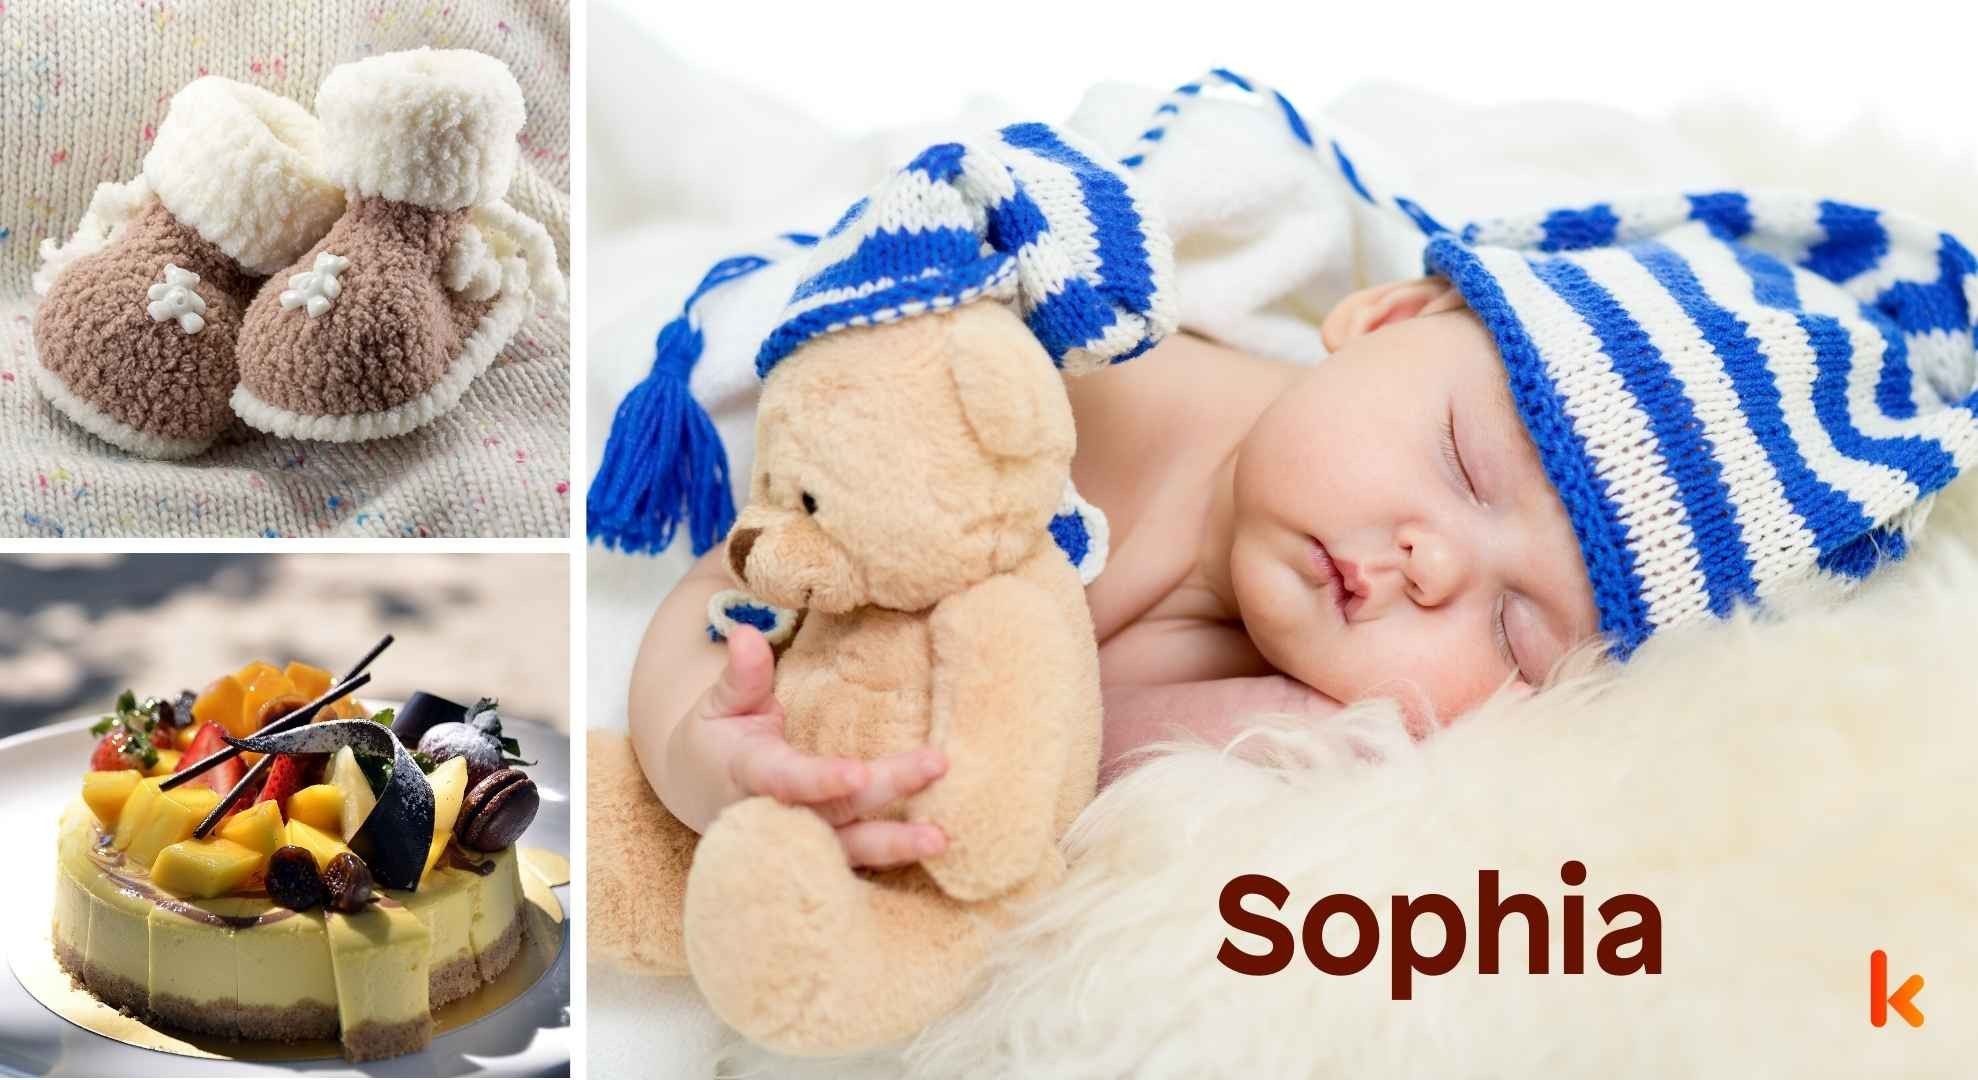 Meaning of the name Sophia